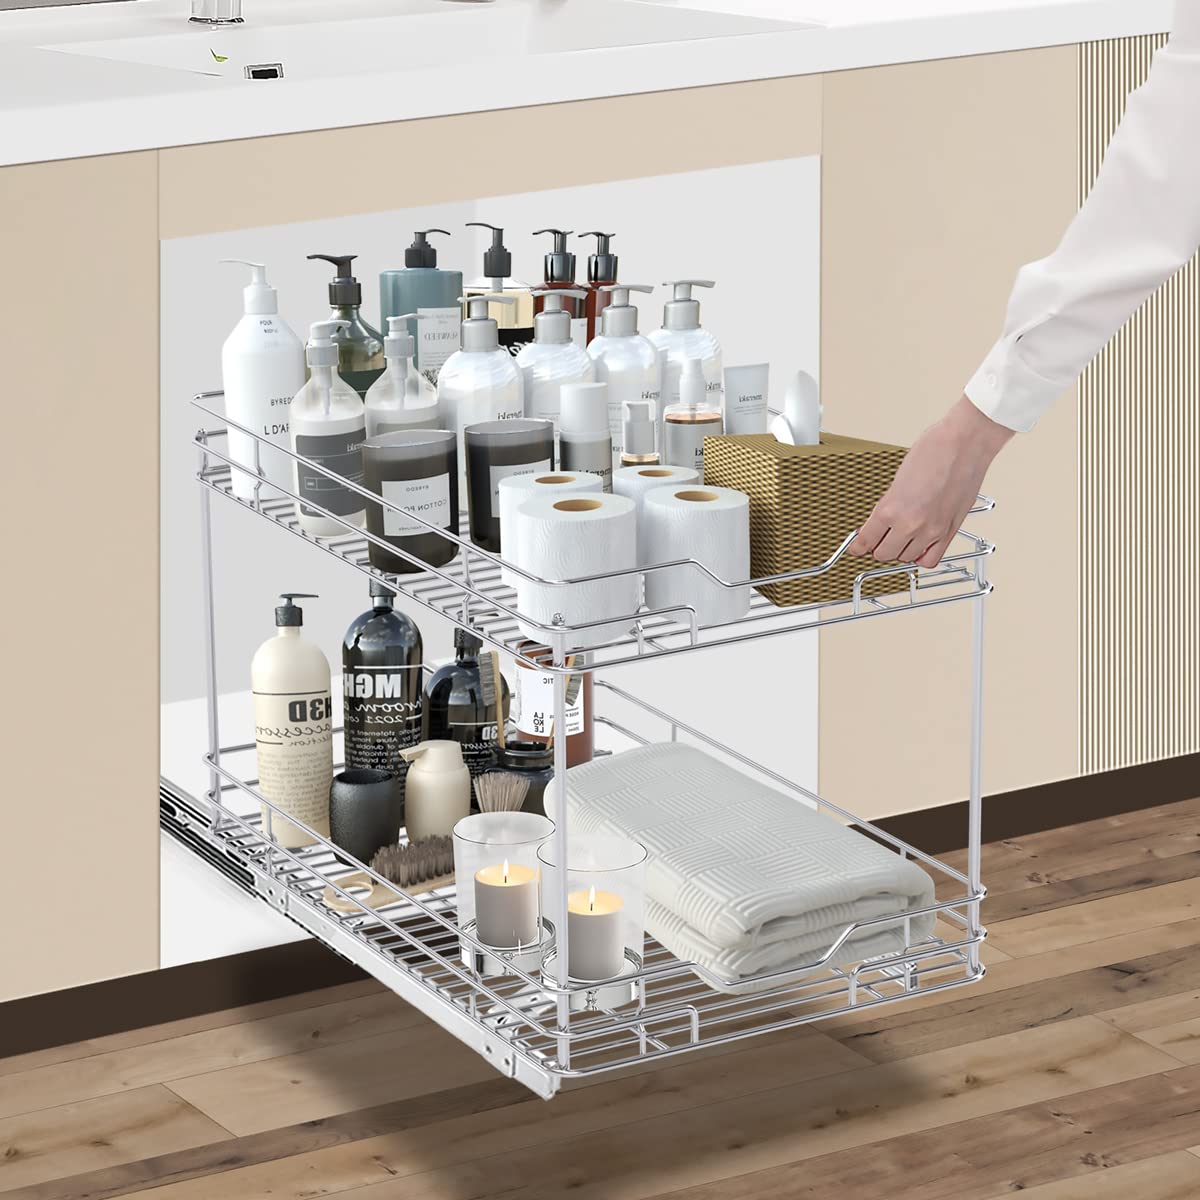 BONADOM 2 Tier Pull Out Cabinet Organizer(21''Dx14''W) Heavy Duty Slide Out Drawers for Kitchen Cabinets Storage Kitchen Roll Out Shelf Storage for Pots, Pans Cabinet Drawers Slide Out